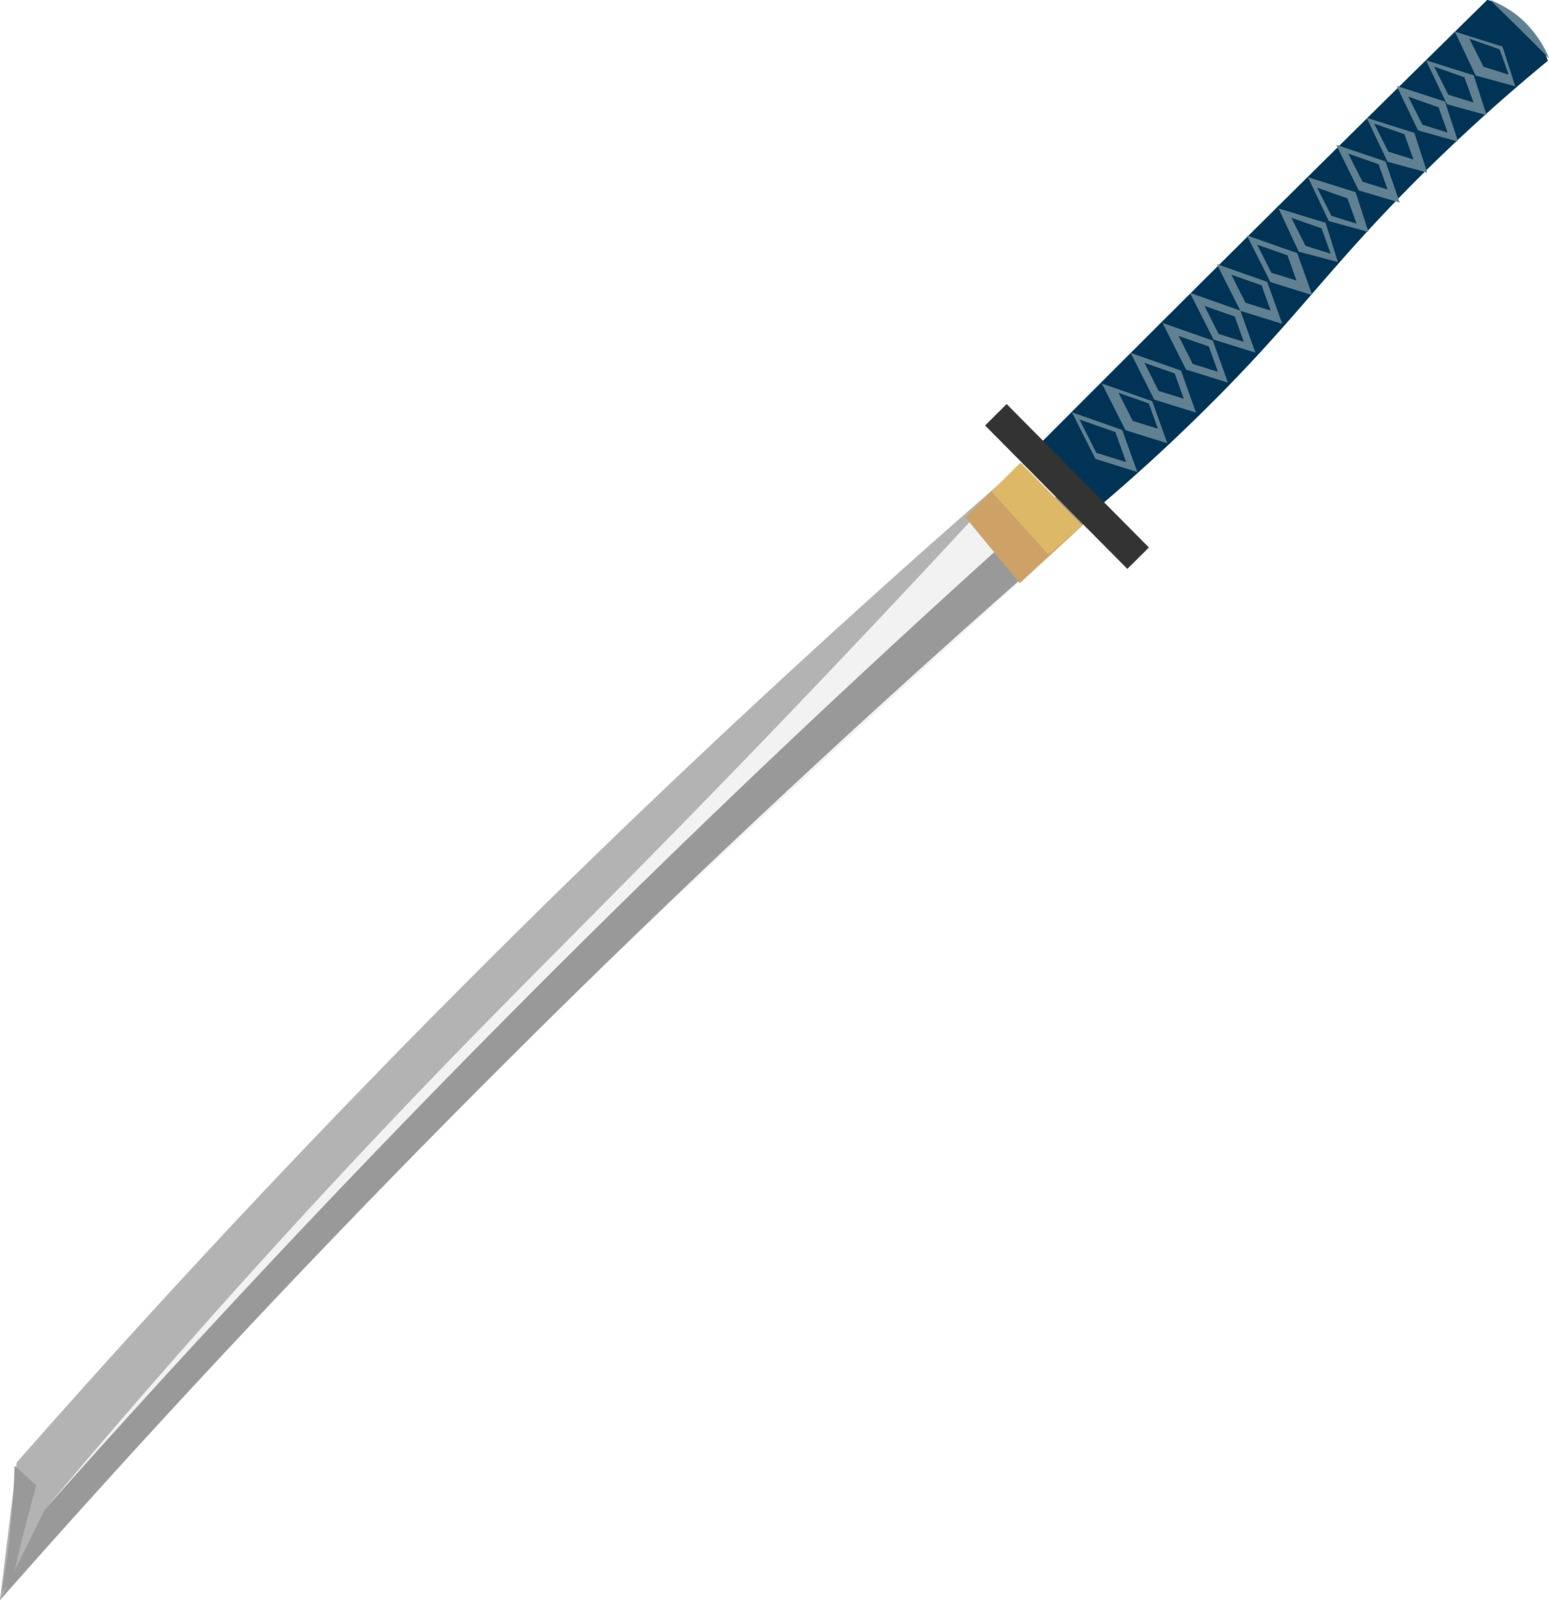 A long gray katana with blue handle, vector, color drawing or illustration. 